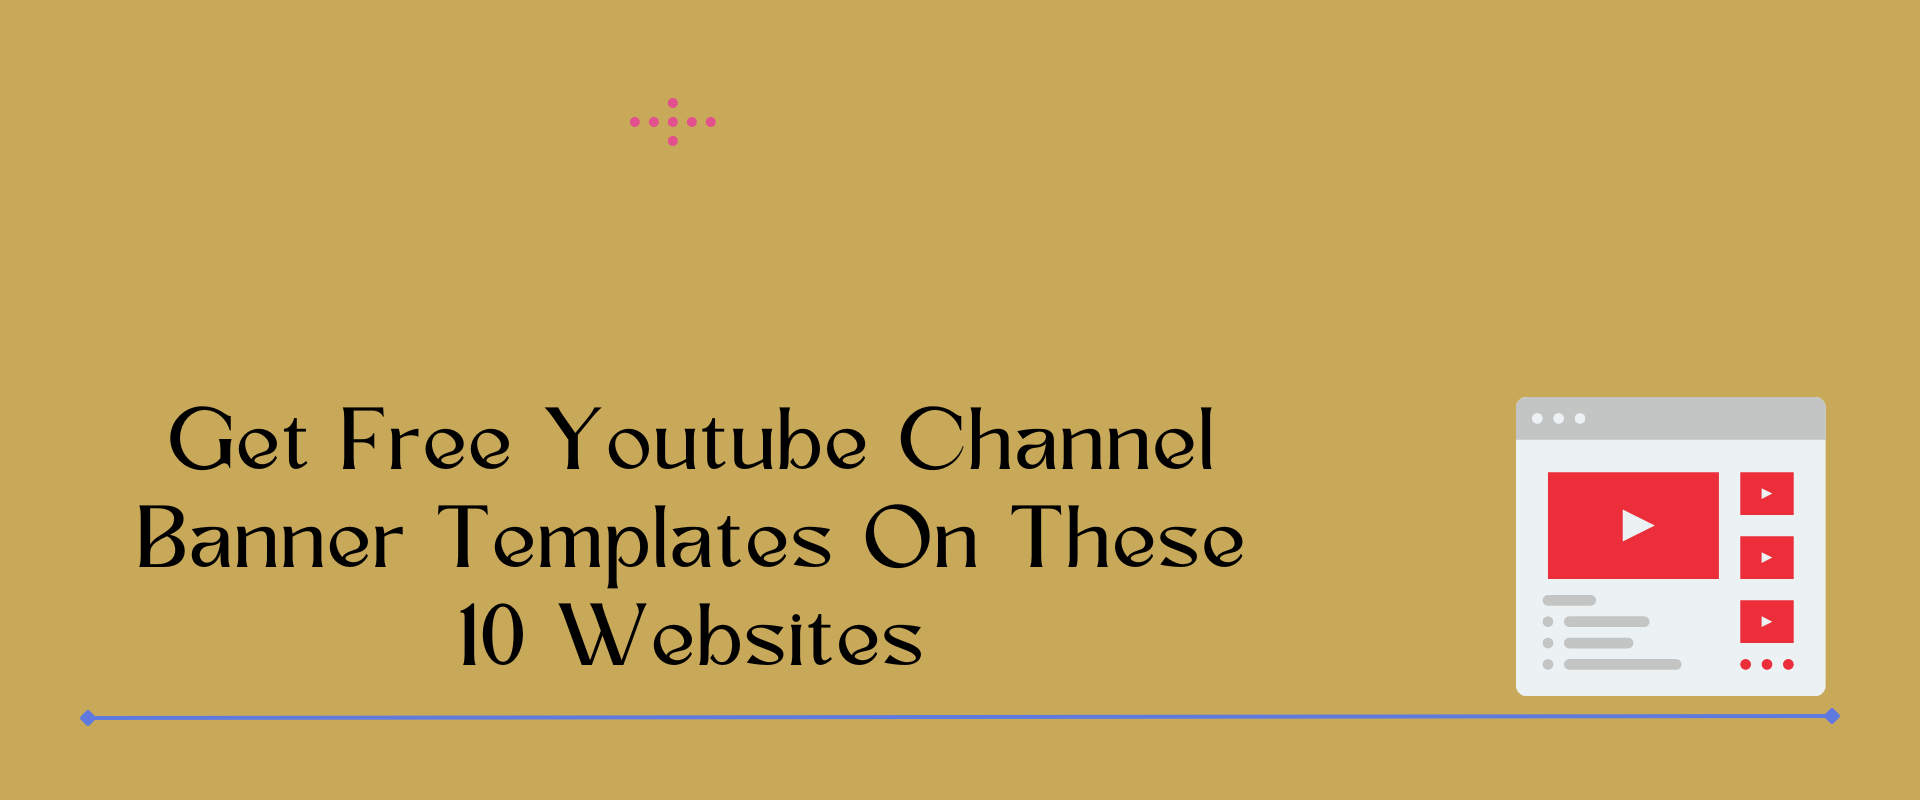 Get Free Youtube Channel Banner Templates On These 10 Websites